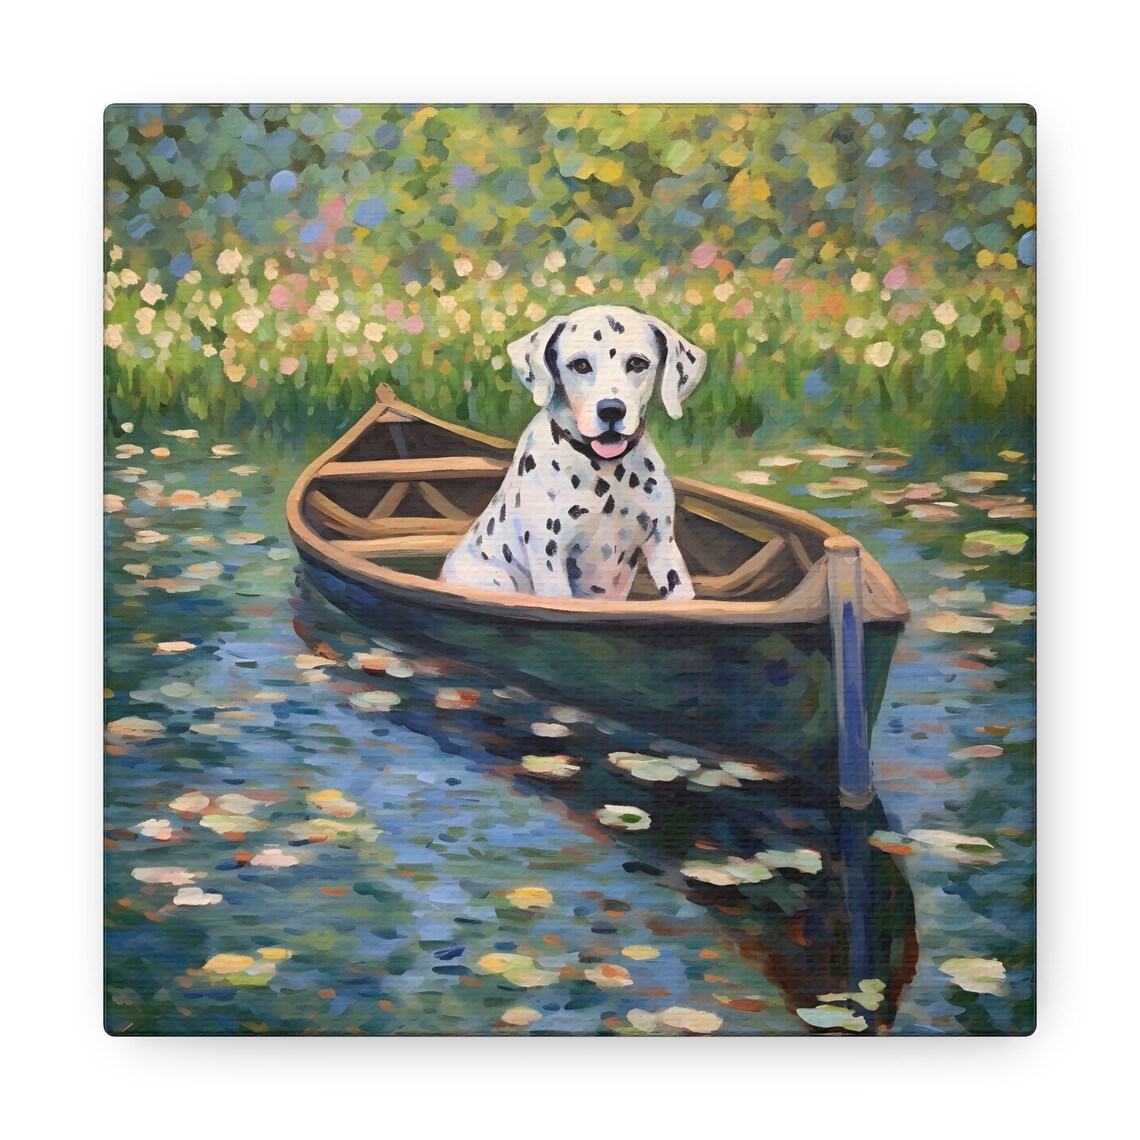 Inspired by the timeless brushstrokes of Monet, this masterpiece seamlessly merges the beauty of Dalmatians with the enchanting landscapes of Impressionist art. #CanvasPrint #ImpressionistArt